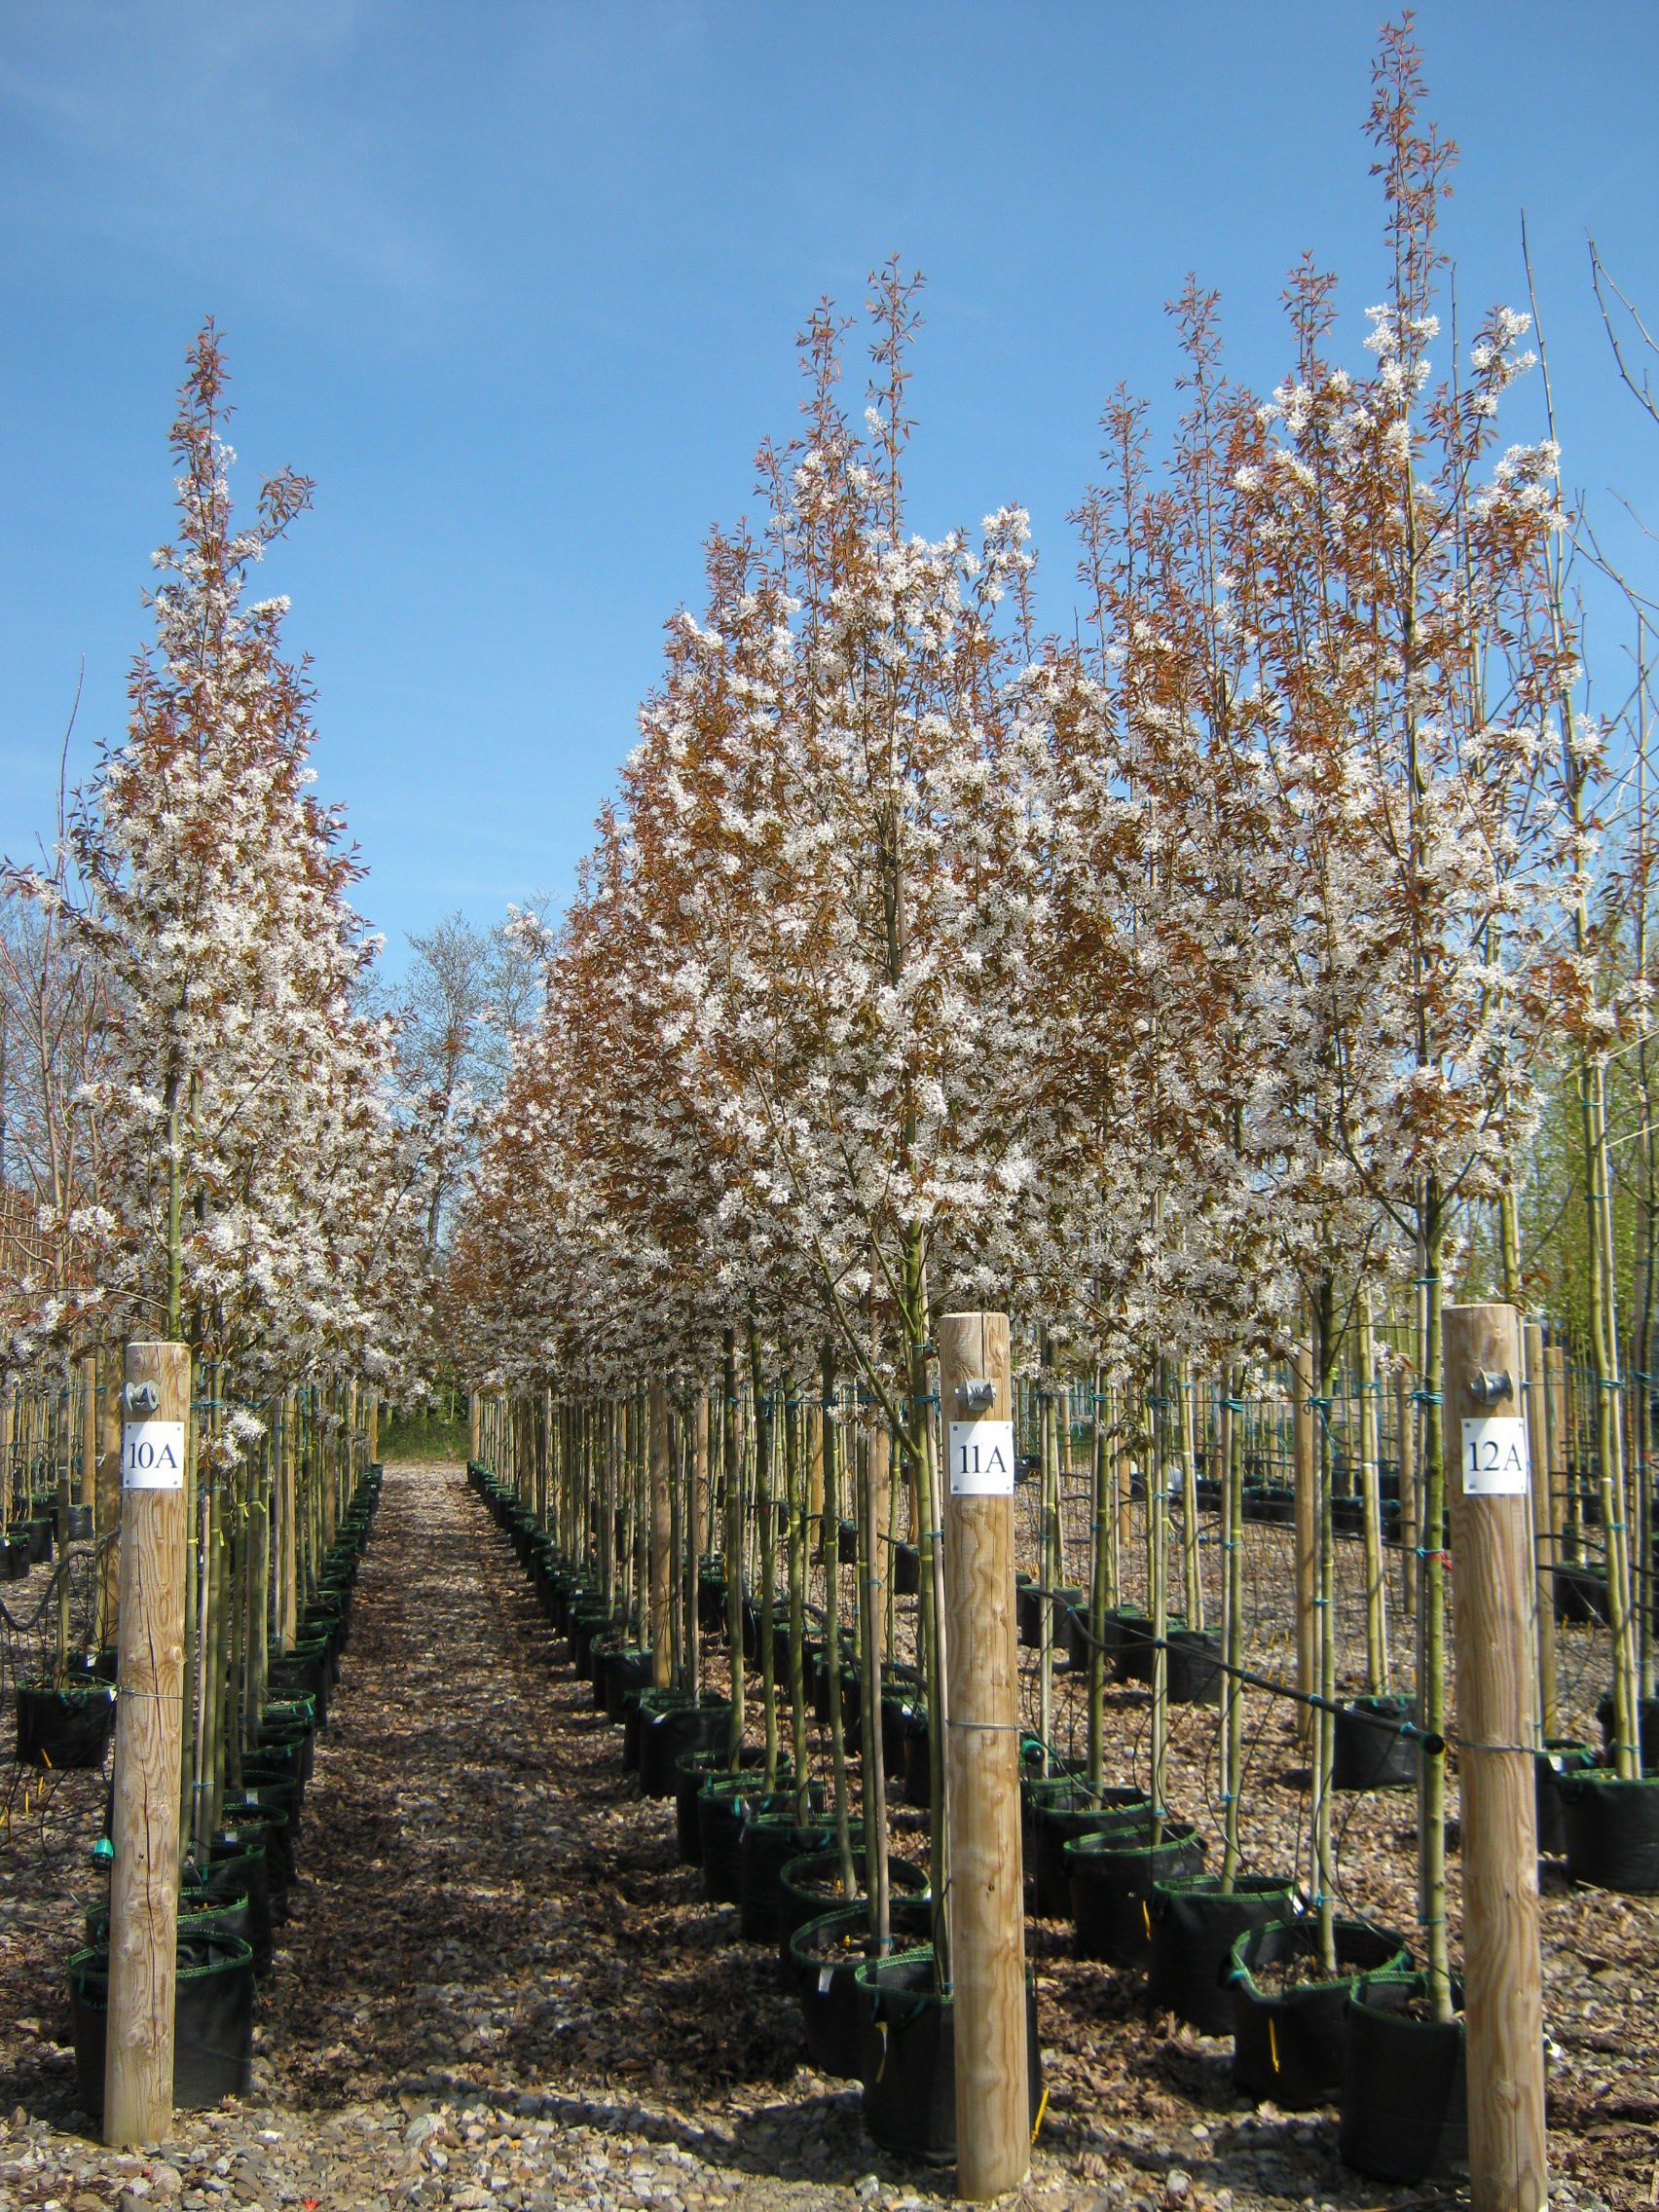 Amelanchier Robin Hill semi-mature trees growing in containers